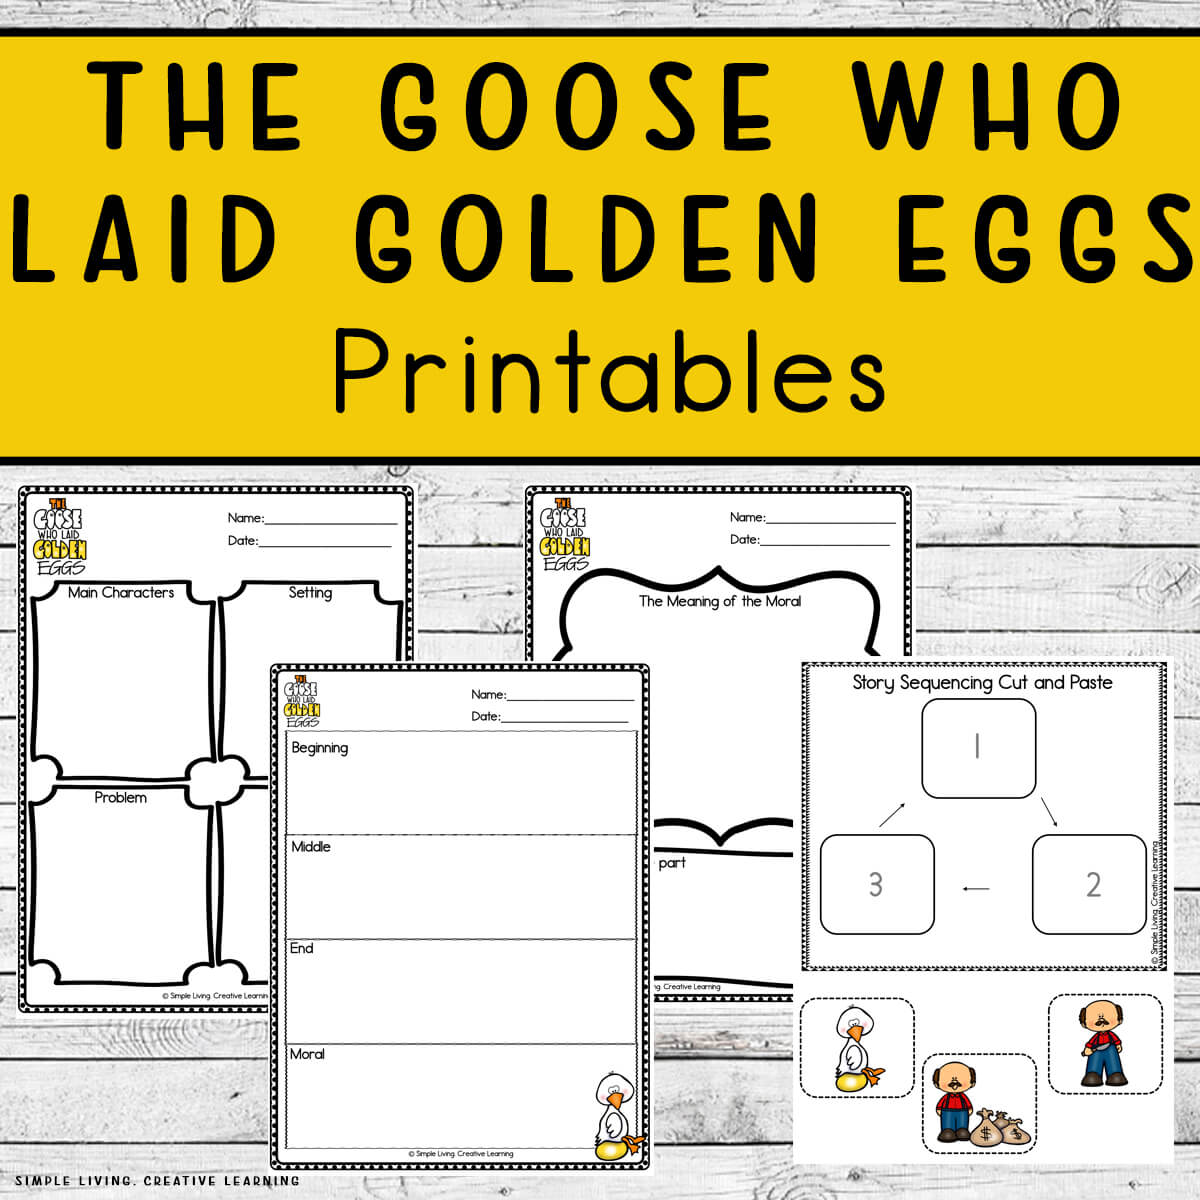 The Goose Who Laid Golden Eggs four pages